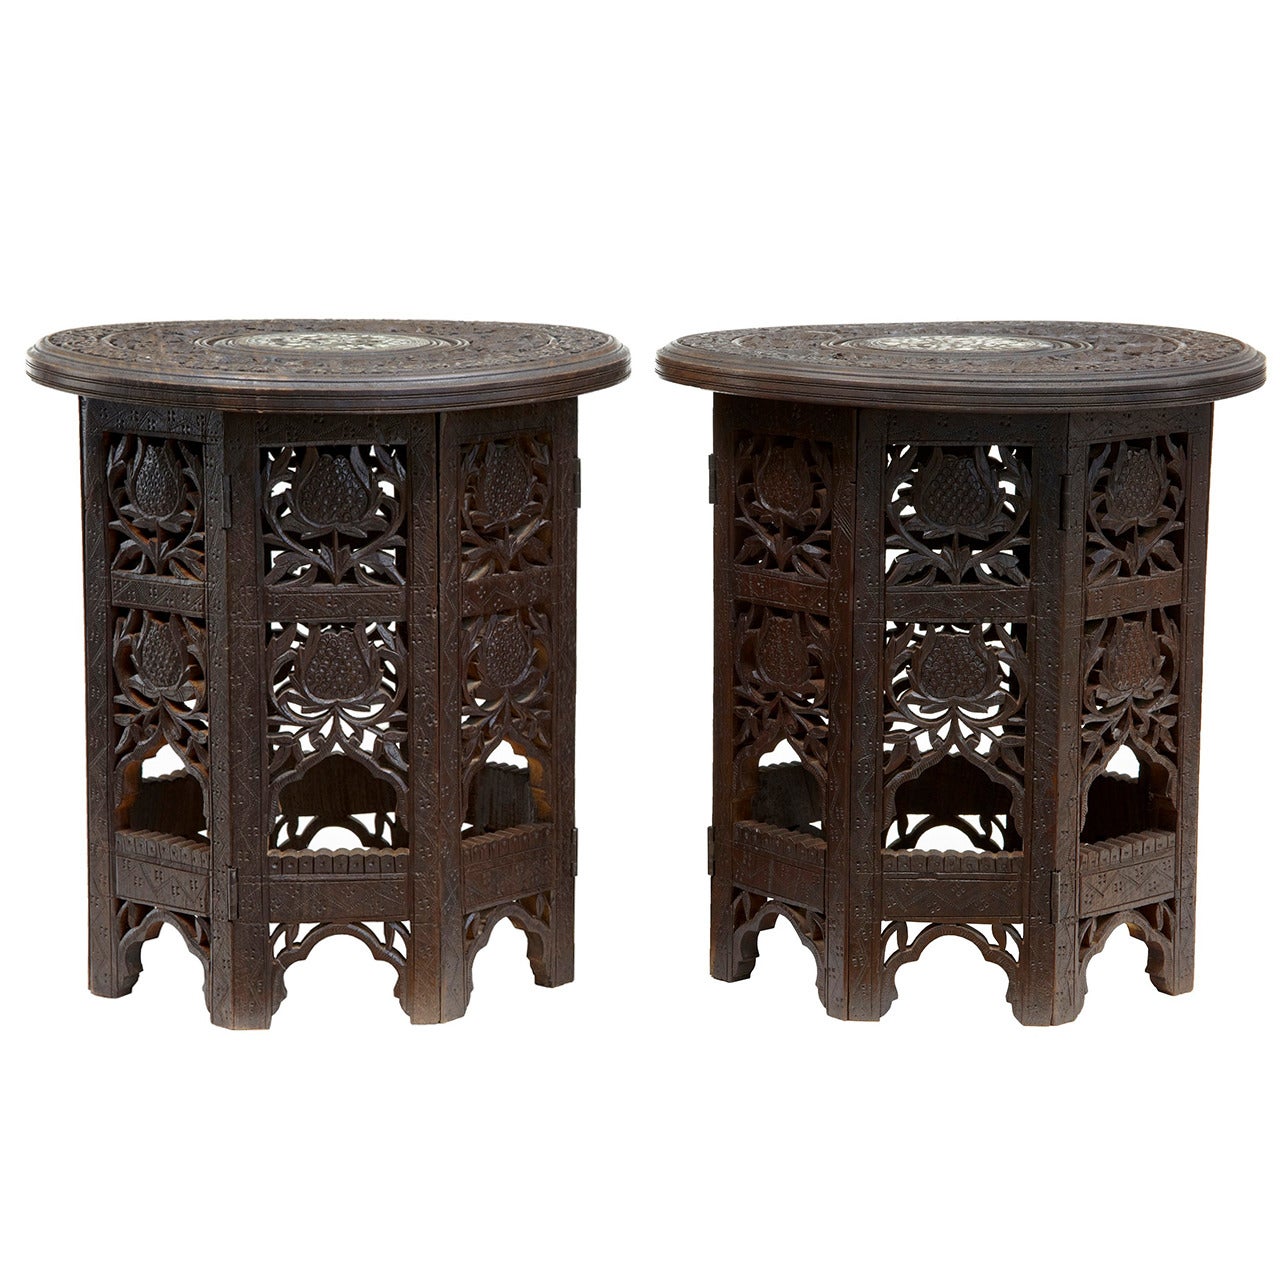 Pair of Late 19th Century Octagonal Hardwood Indian Occasional Tables